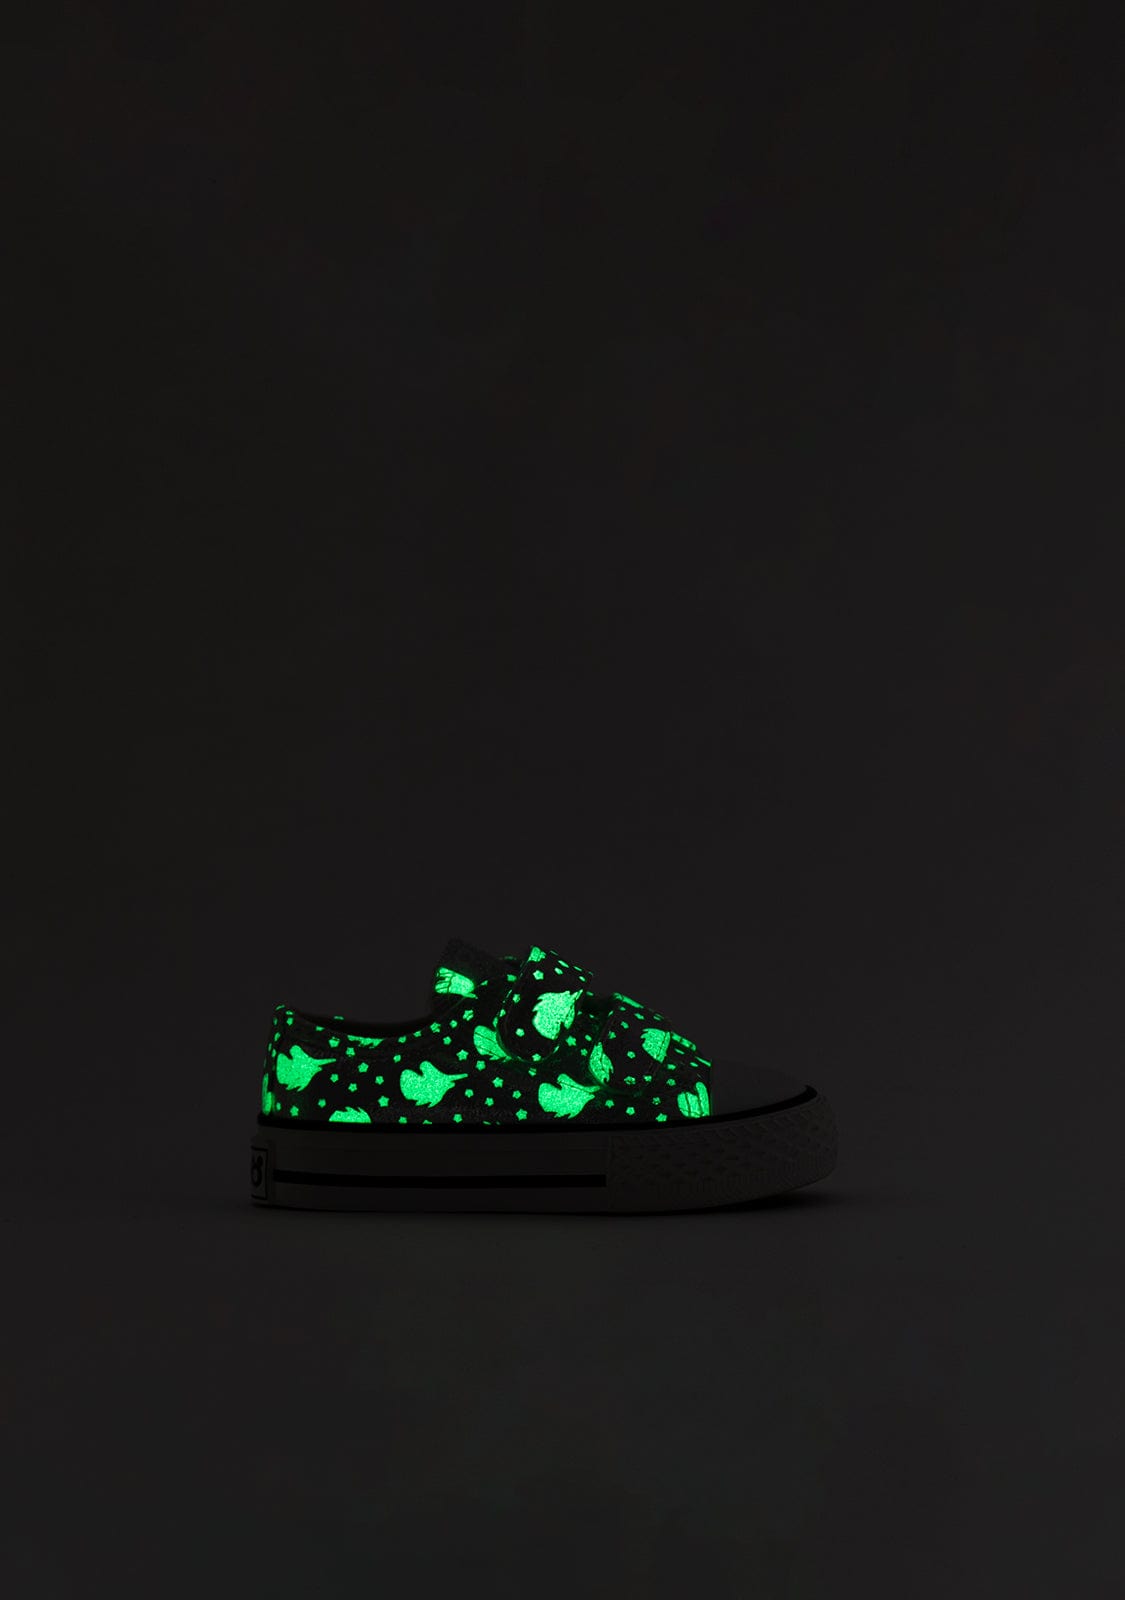 OSITO Shoes Baby's Silver Glows in the Dark Sneakers Canvas